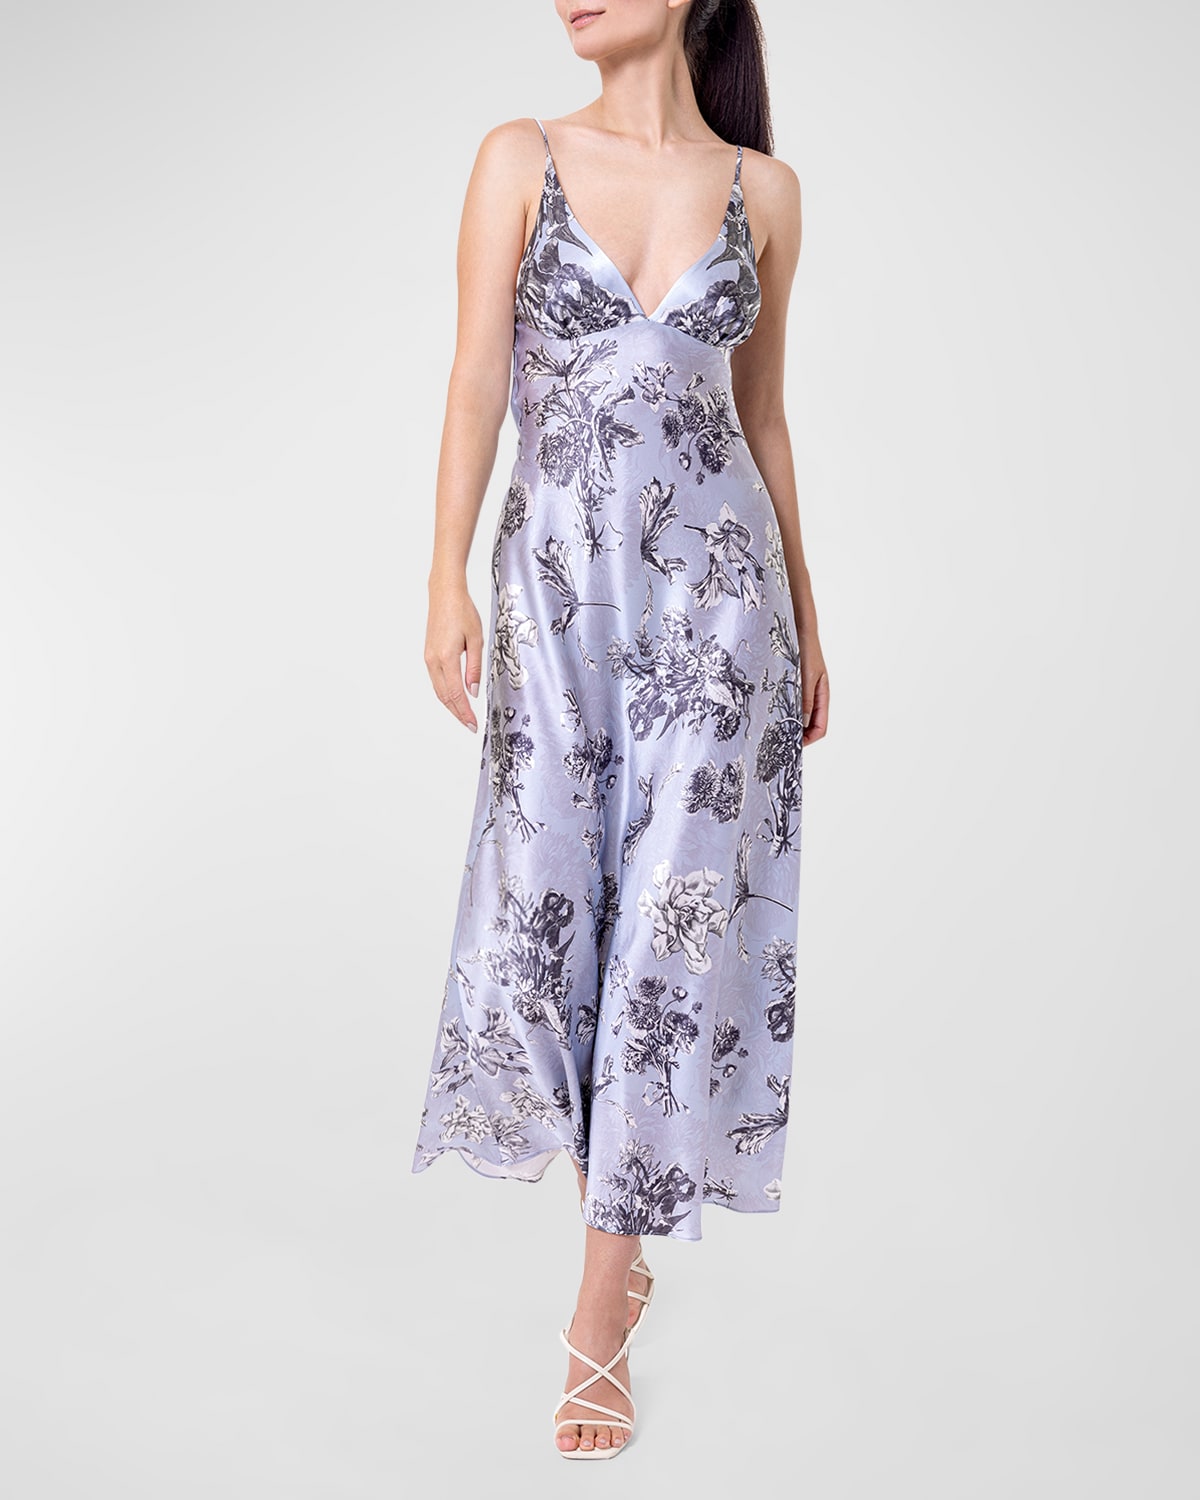 Toile Jardin Floral-Print Charmeuse Nightgown